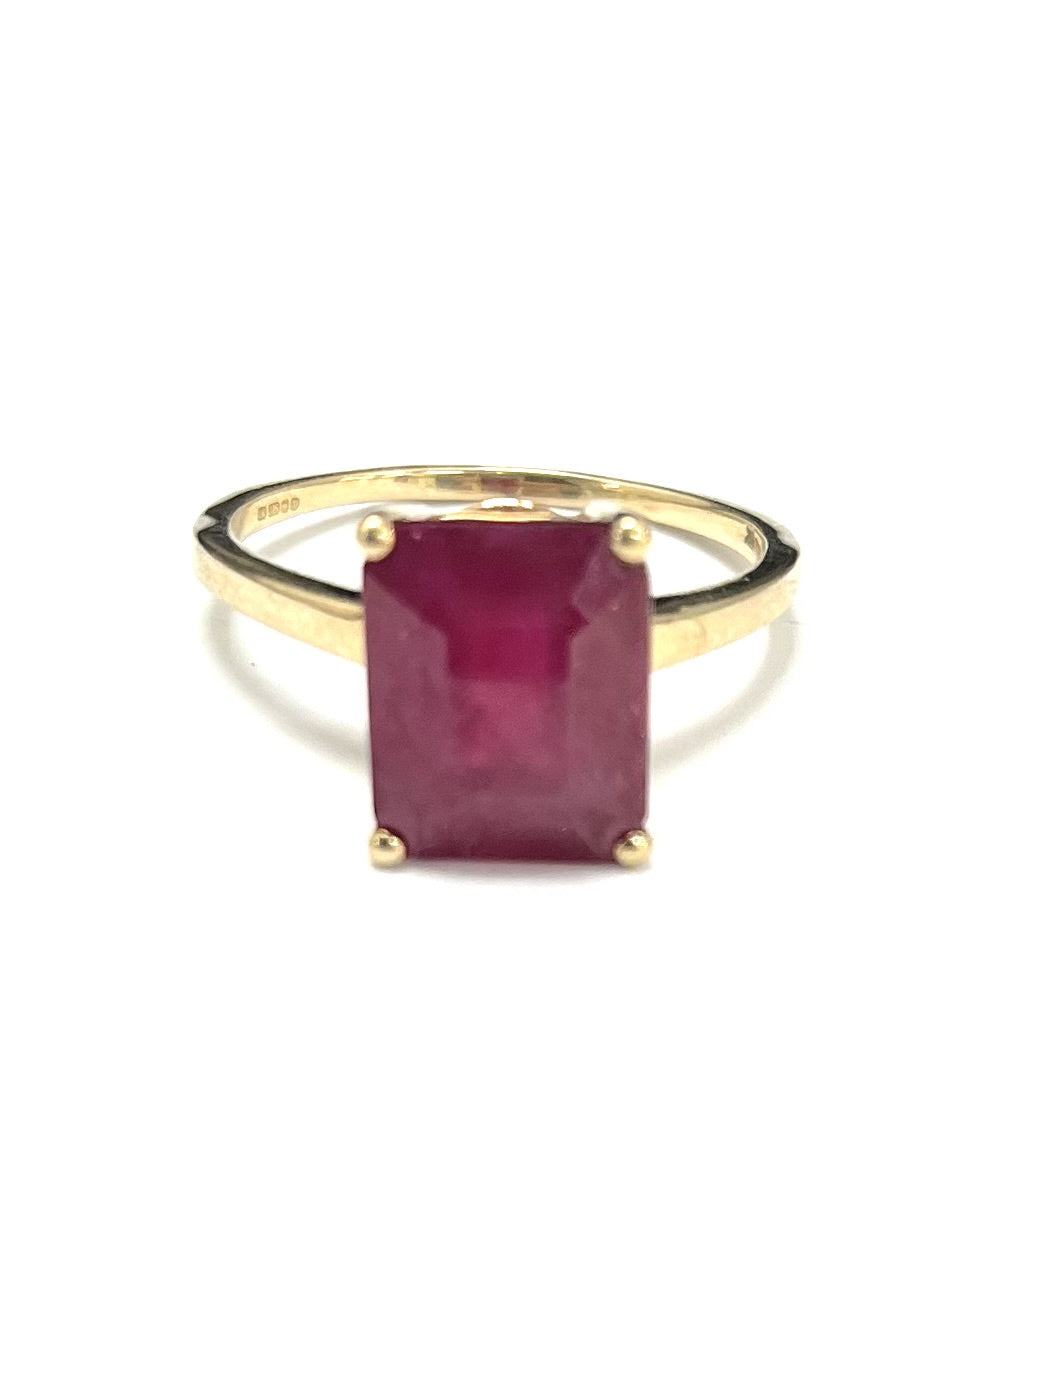 9ct Yellow Gold Emerald Cut Ruby Ring